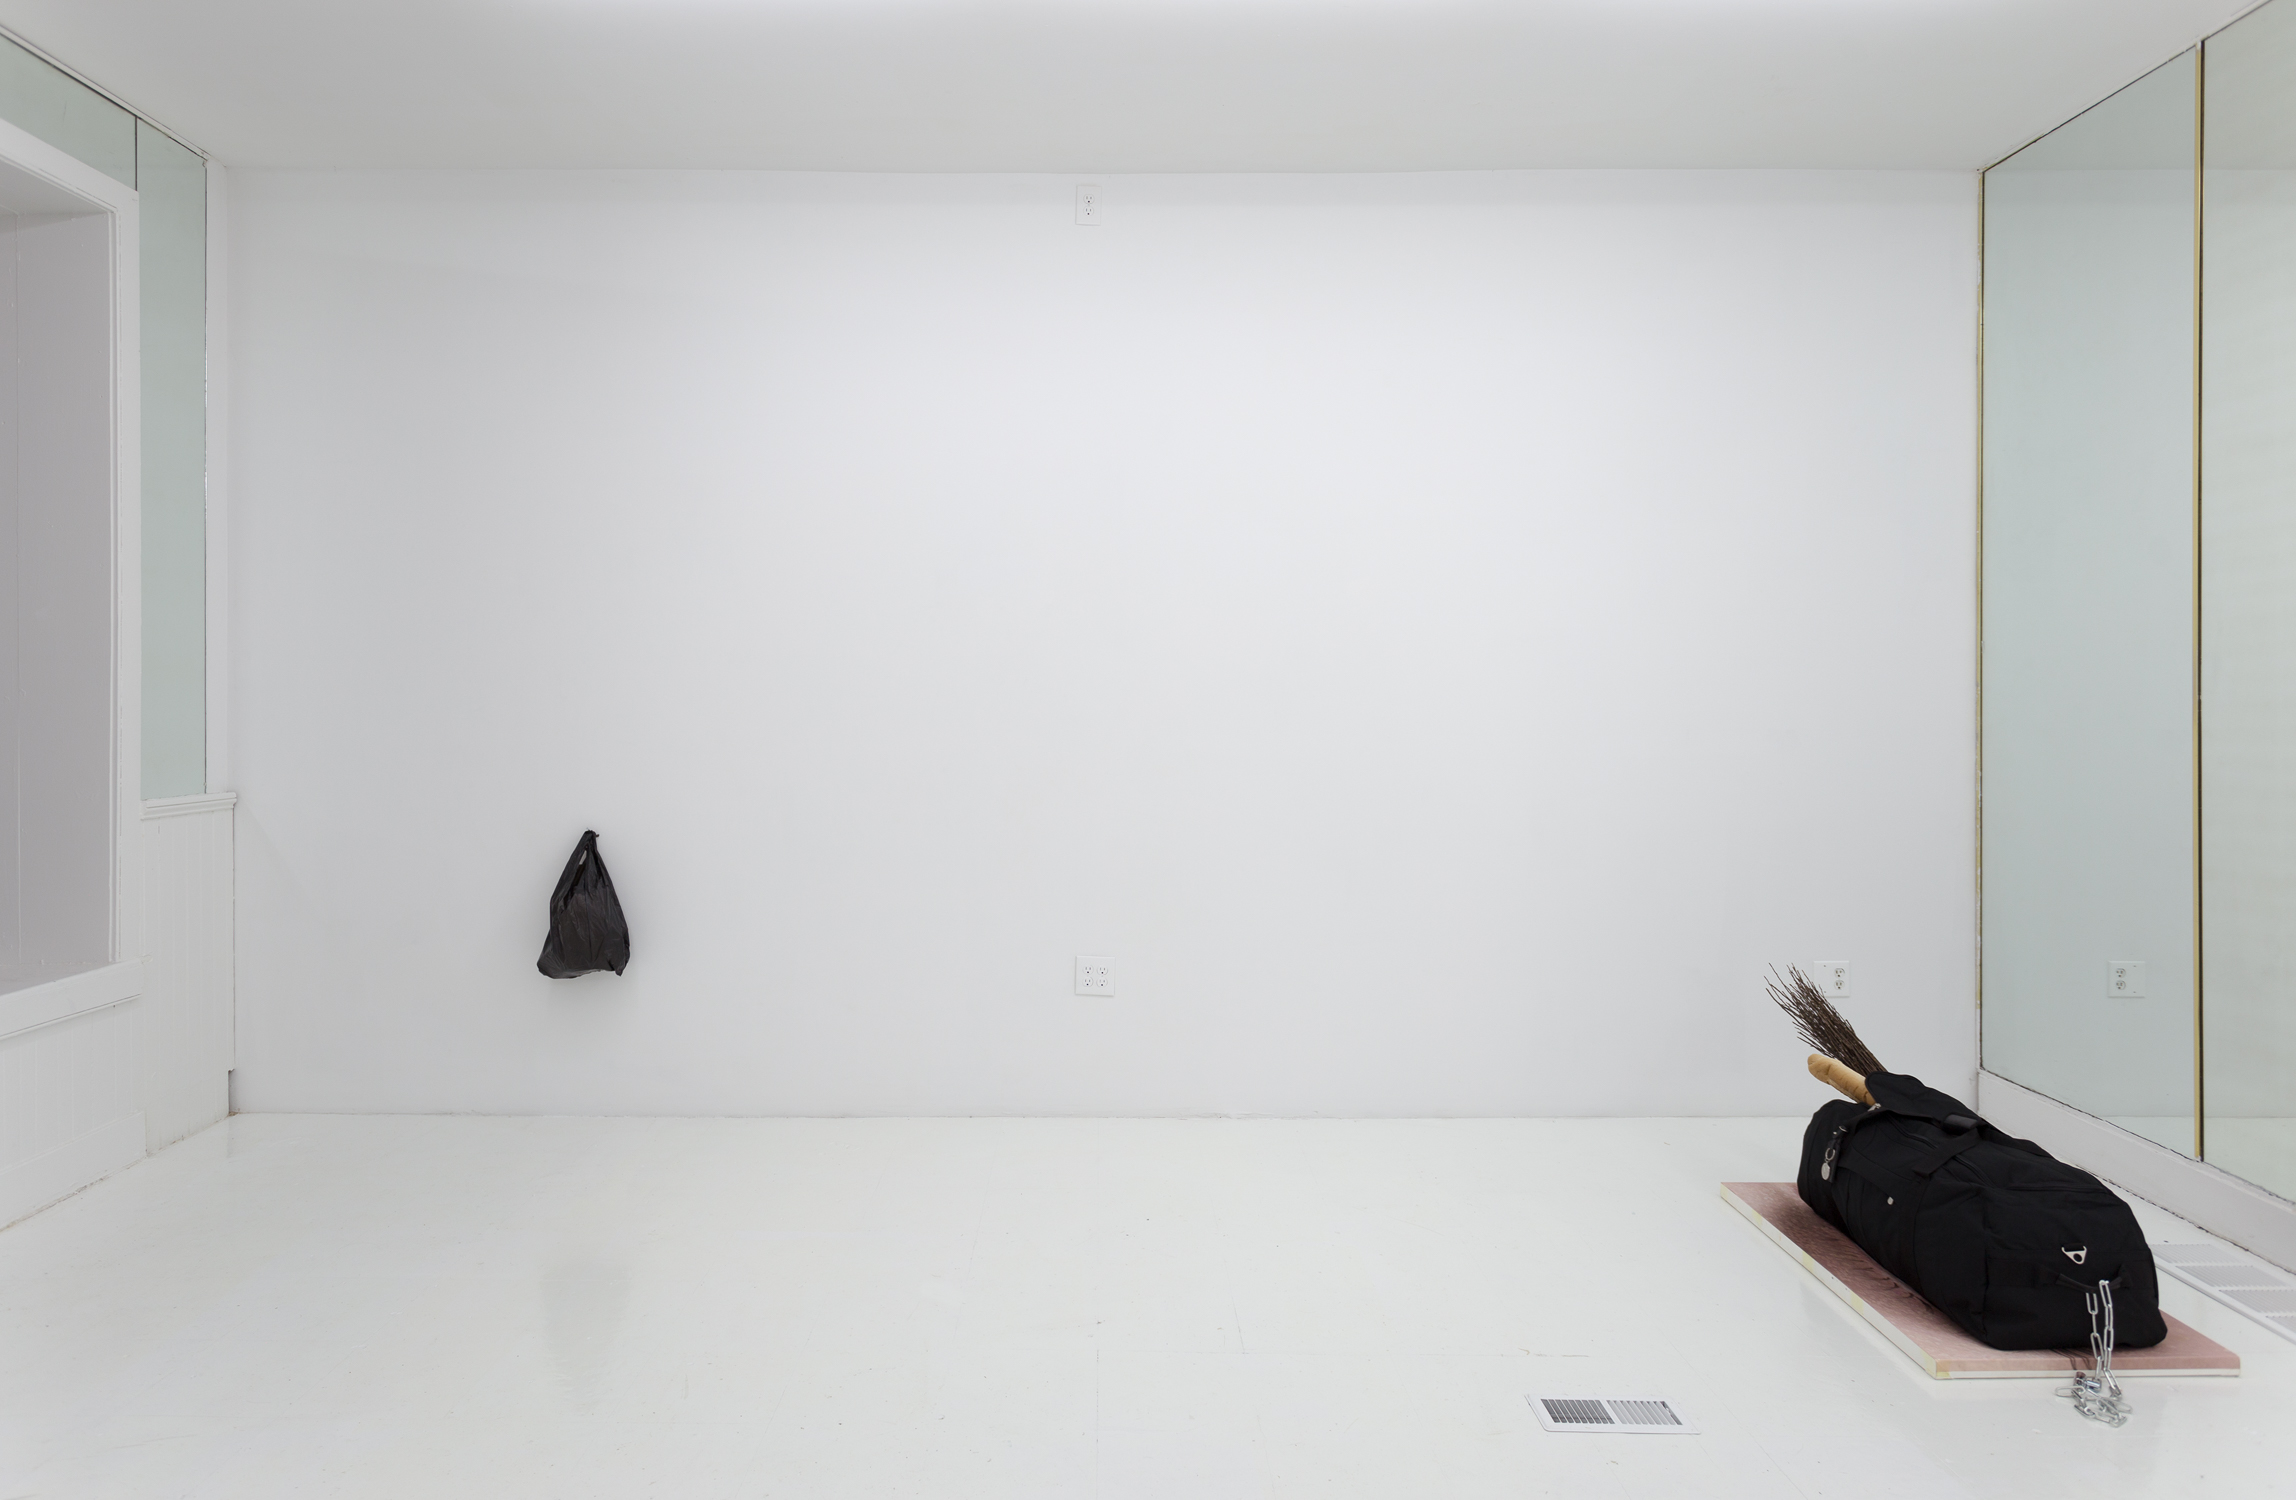 A black plastic bag hangs on a wall to the lower left; on the right, a black duffel bag sits on top of a painting on the floor